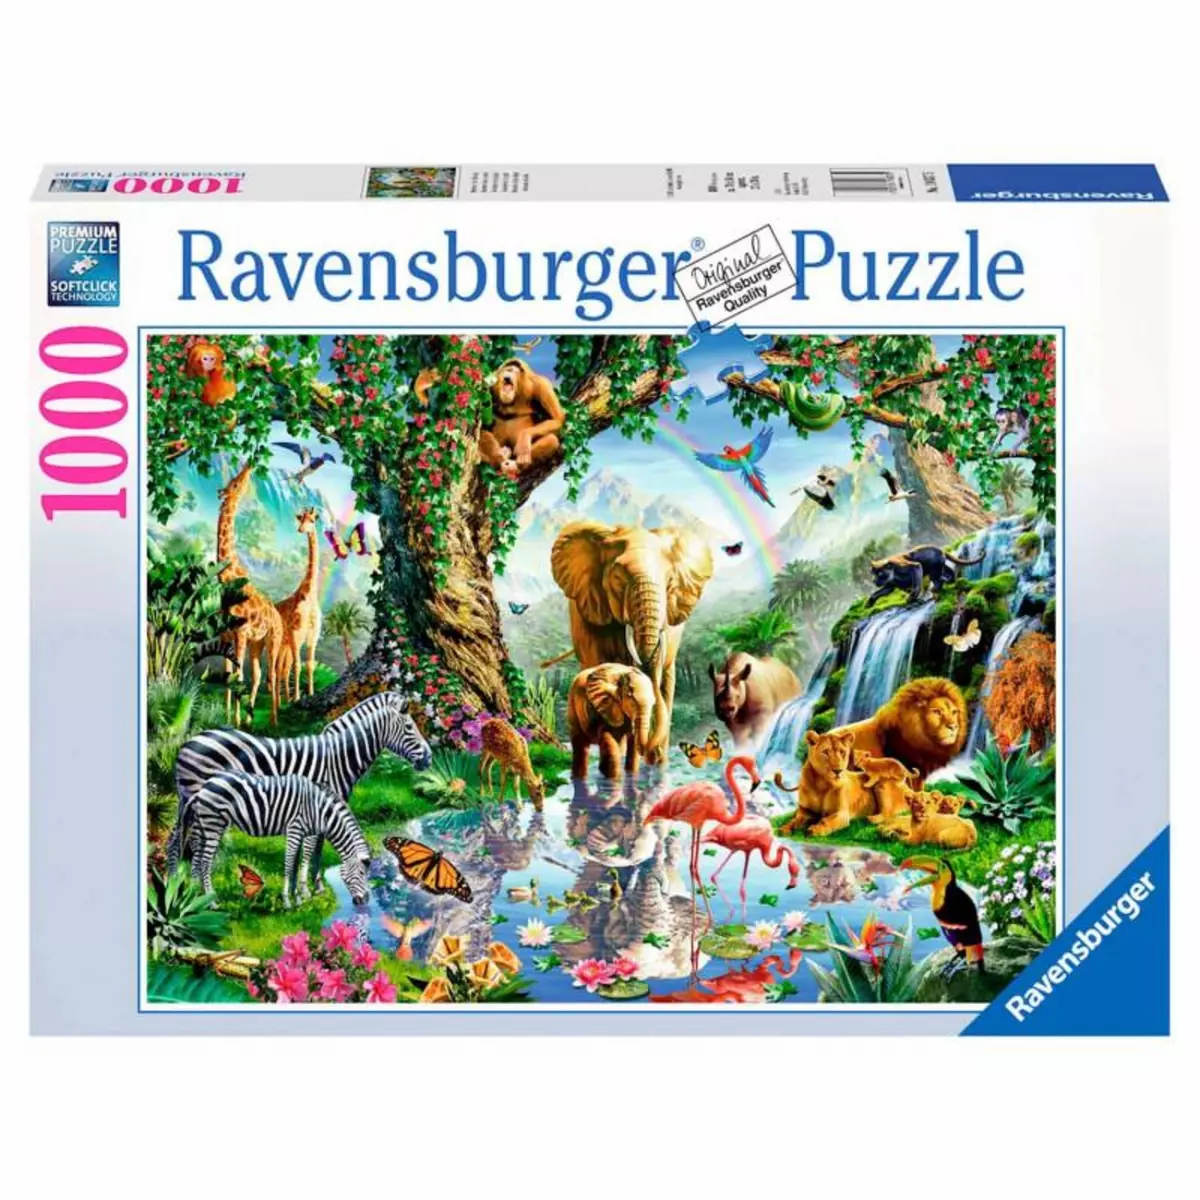 RAVENSBURGER RAVENSBURGER Adventures in the Jungle Puzzle, 1000st.